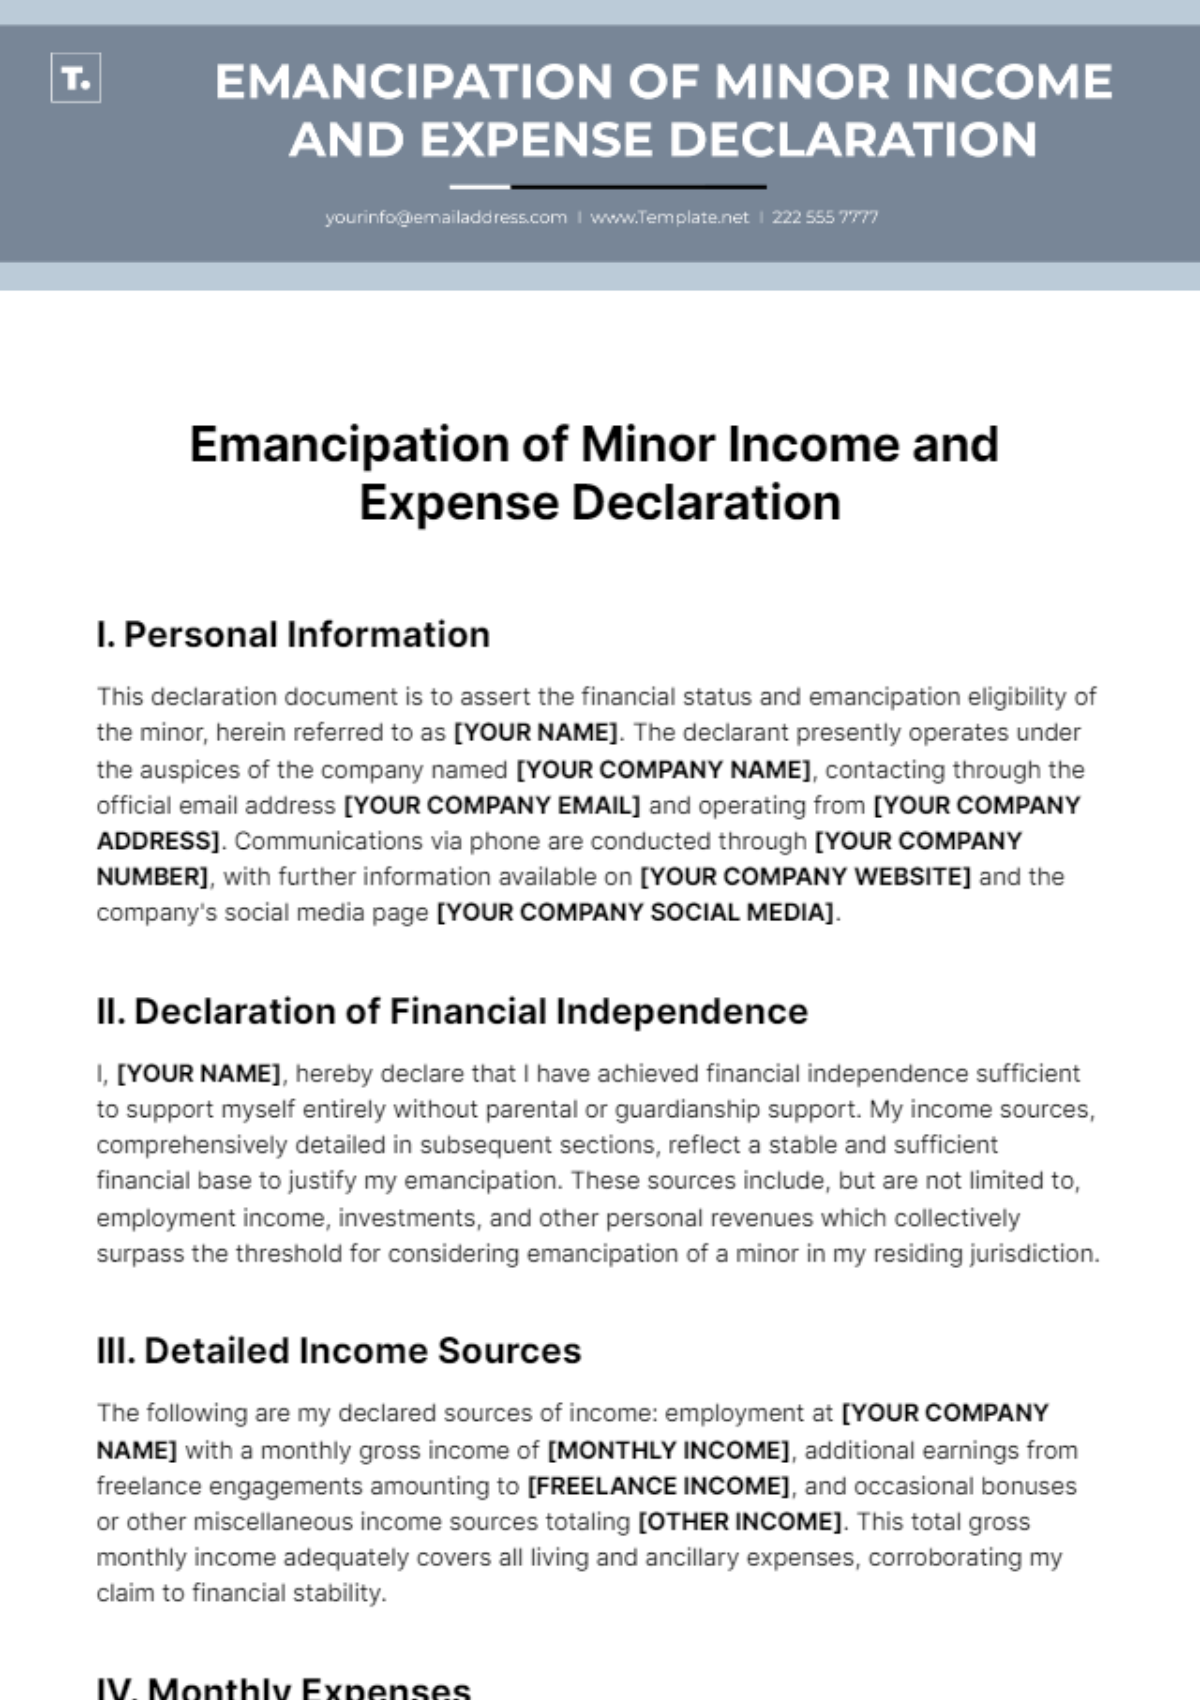 Free Emancipation of Minor Income and Expense Declaration Template